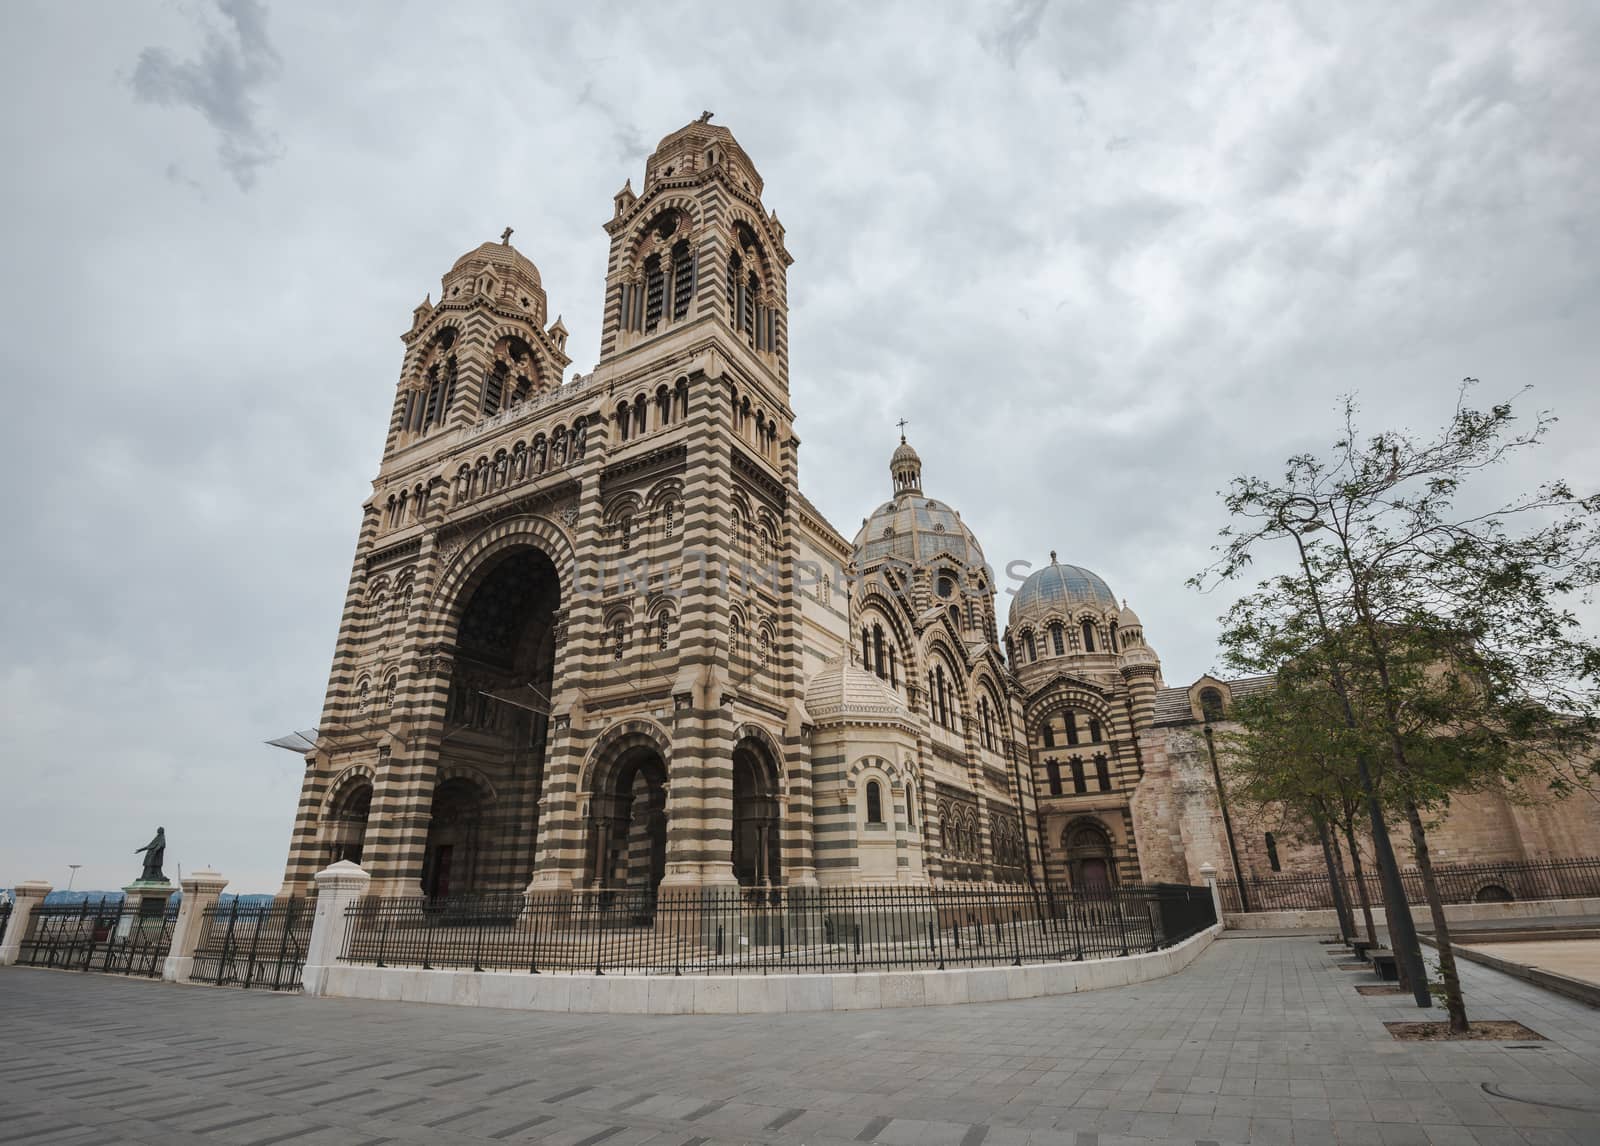 Enormous Marseilles Cathedral, one of the largest cathedrals in France, in a cloudy day